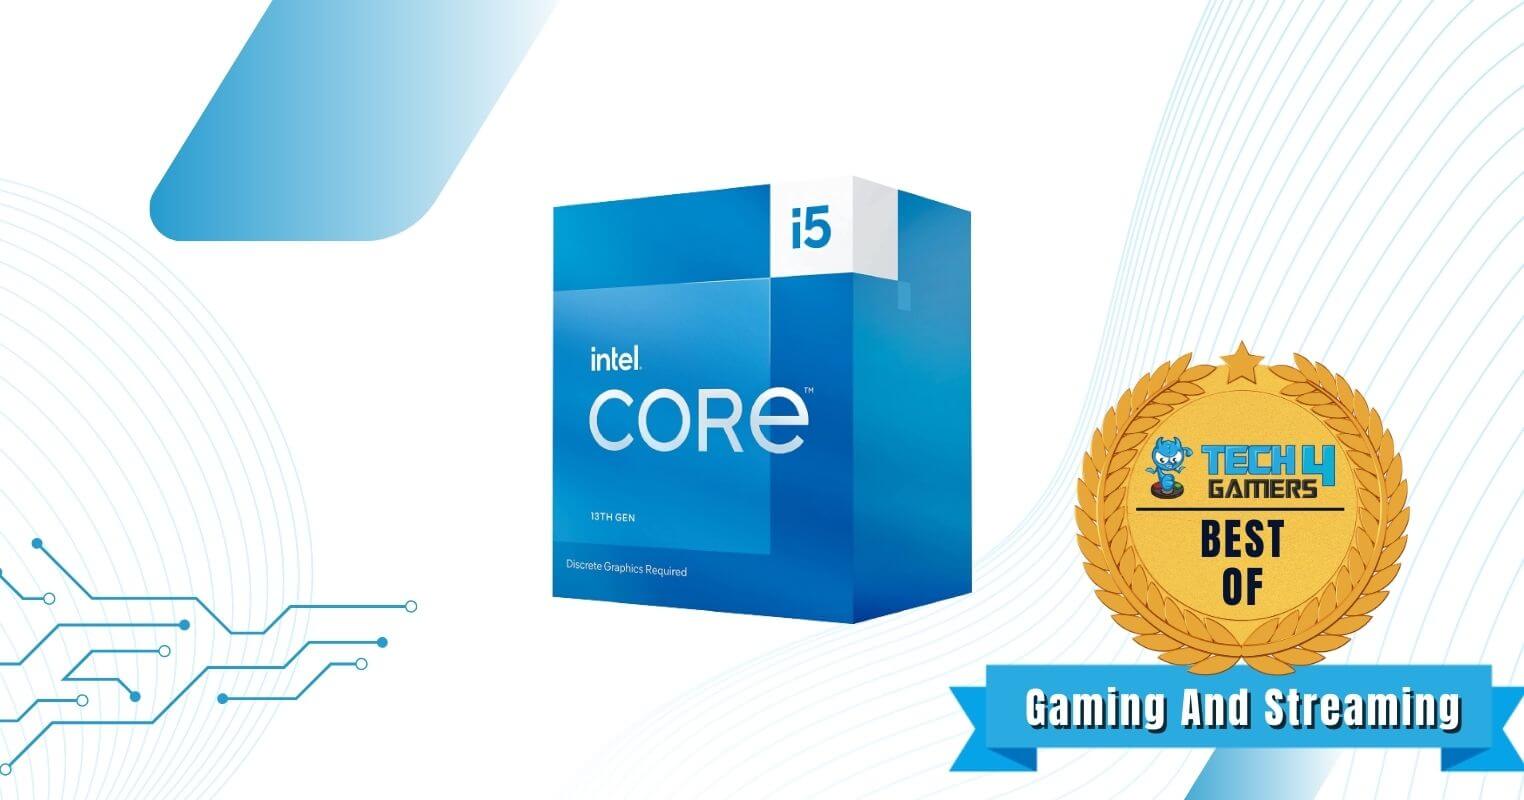 Core i5-13400F - Budget CPU For Gaming And Streaming